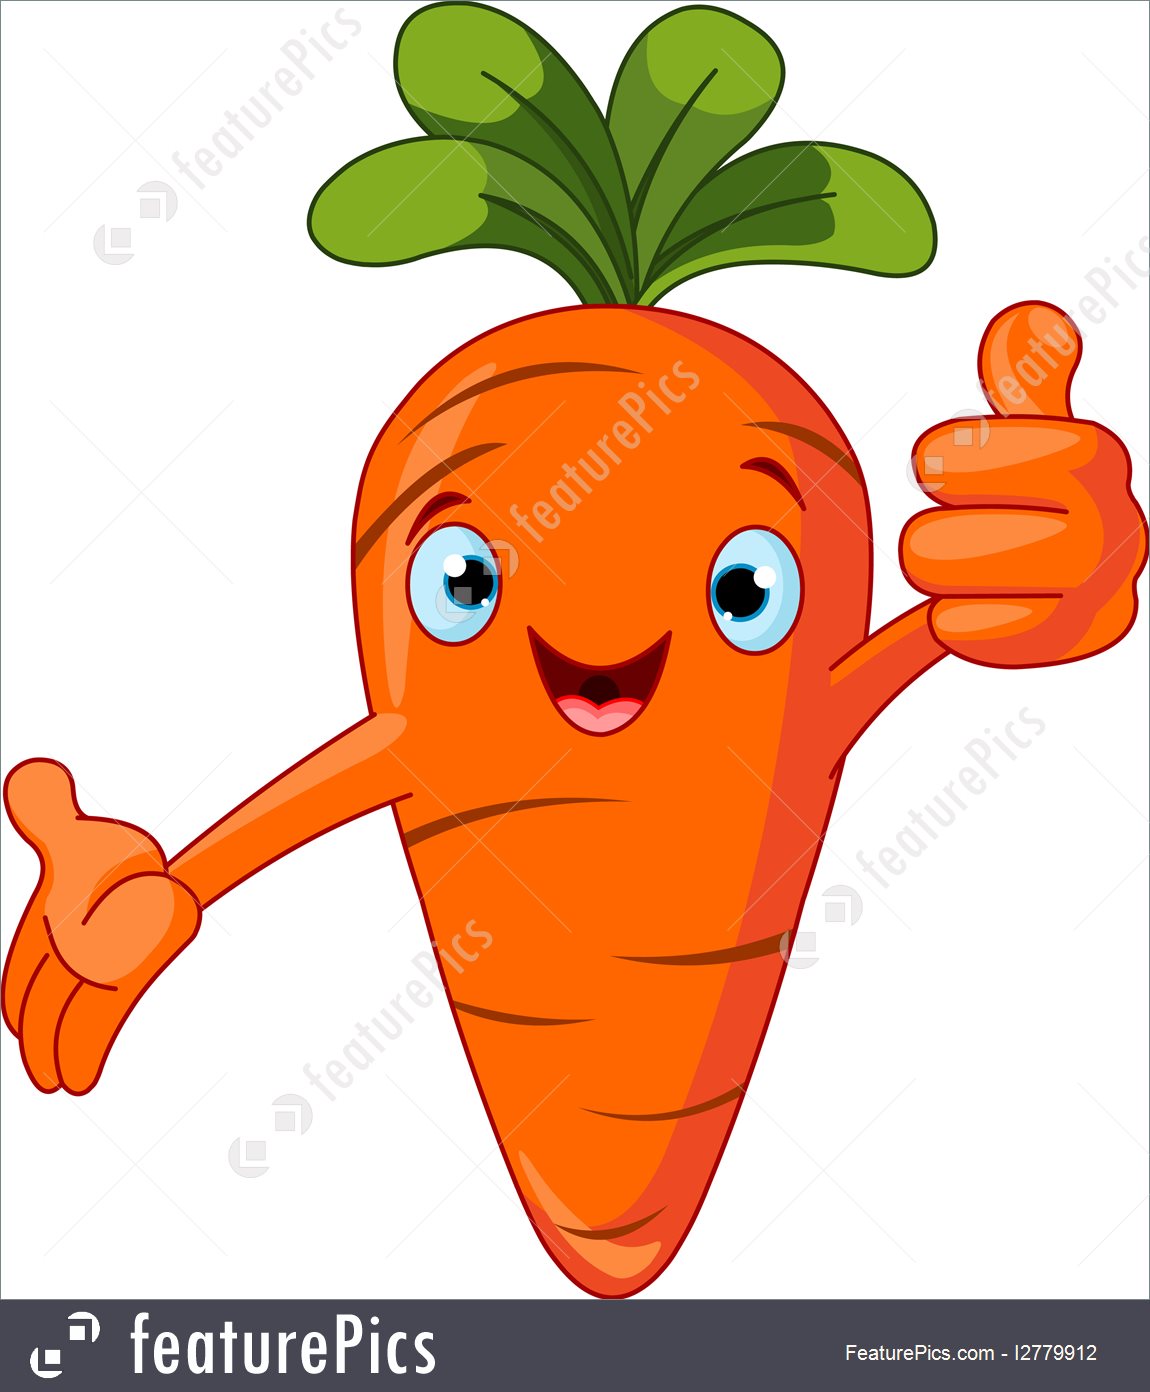 Illustration of a Carrot Character giving thumbs up